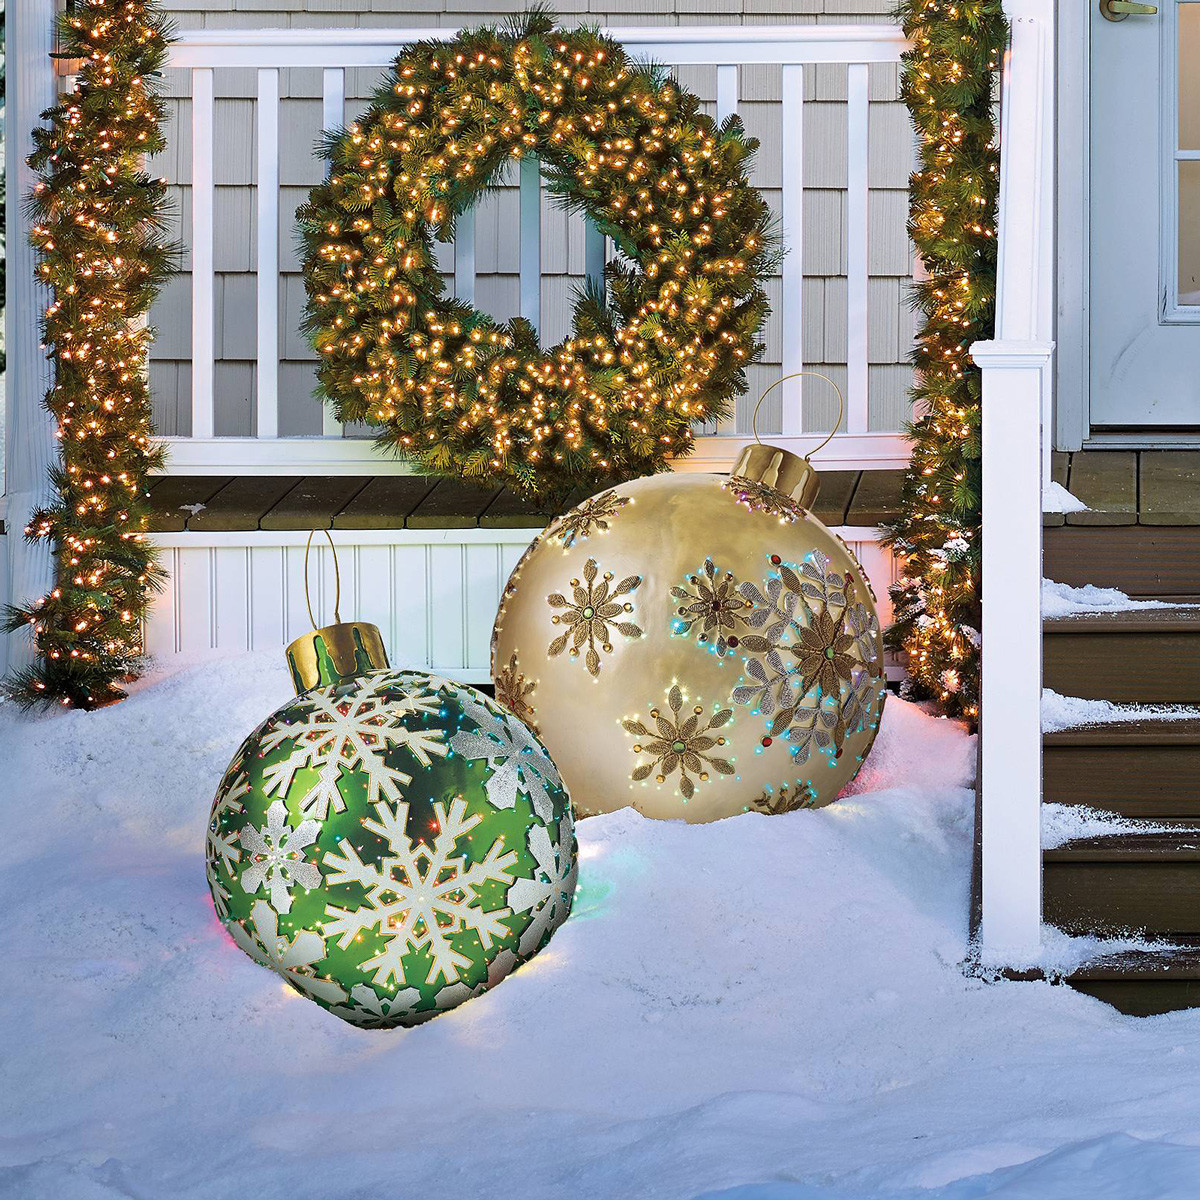 Giant Outdoor Christmas Ornaments
 Massive Fiber Optic LED Outdoor Christmas Ornaments The